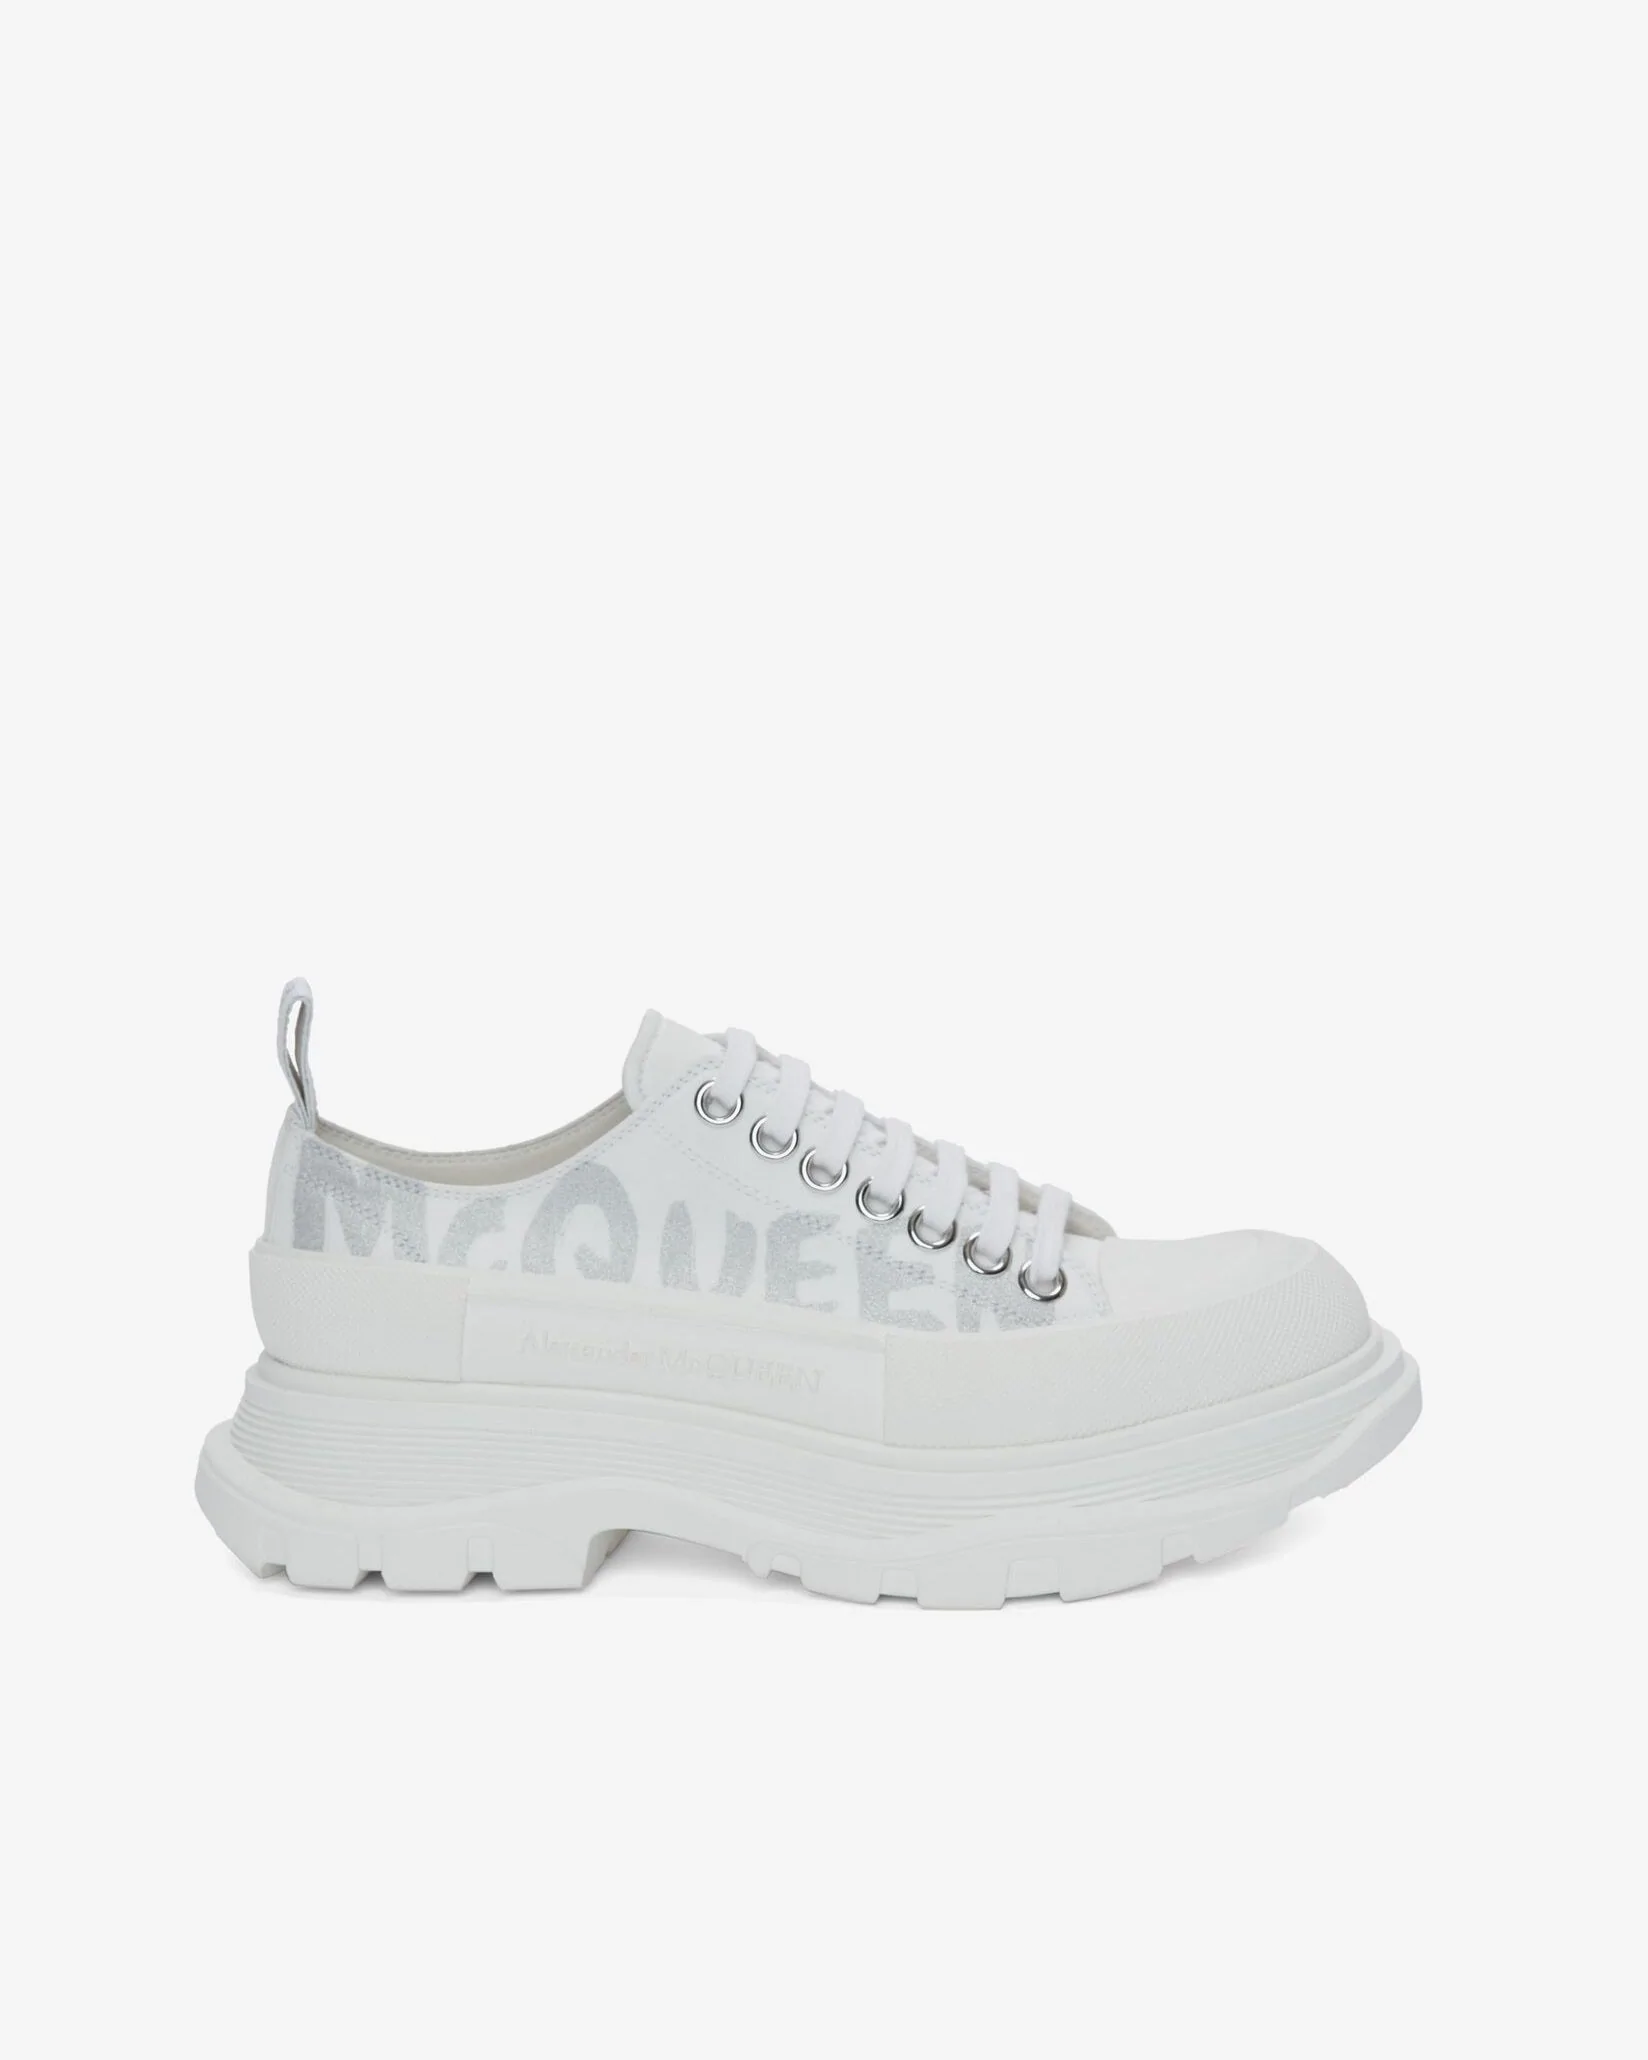 Alexander McQueen Tread Slick Lace Up in White/silver